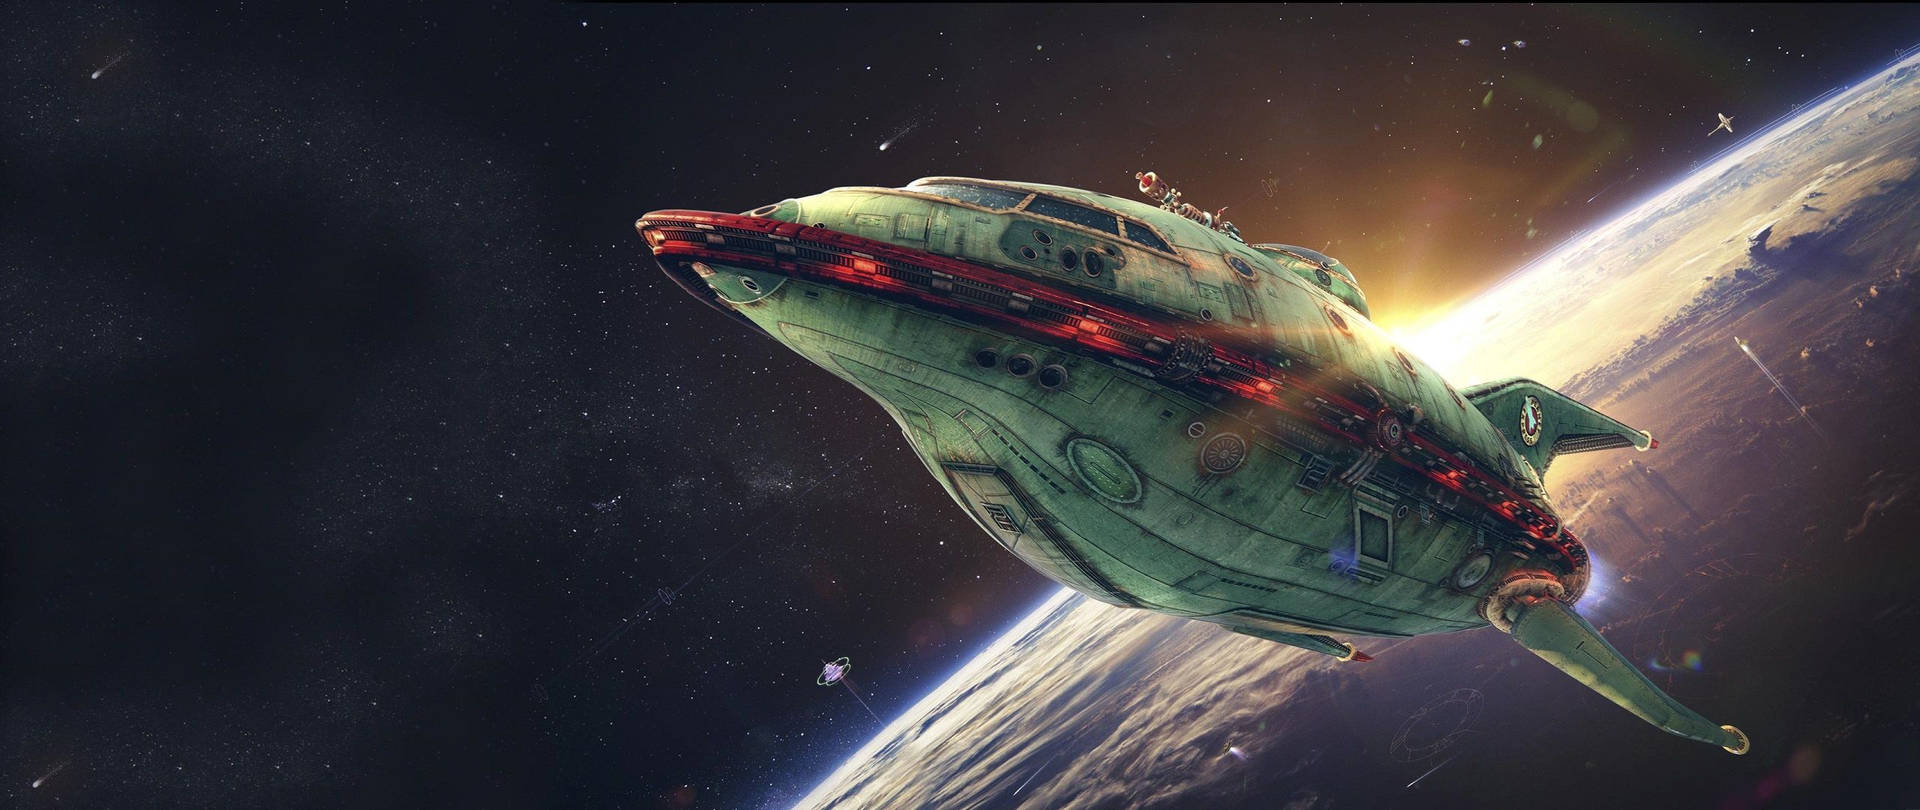 Green Spaceship In Outer Space